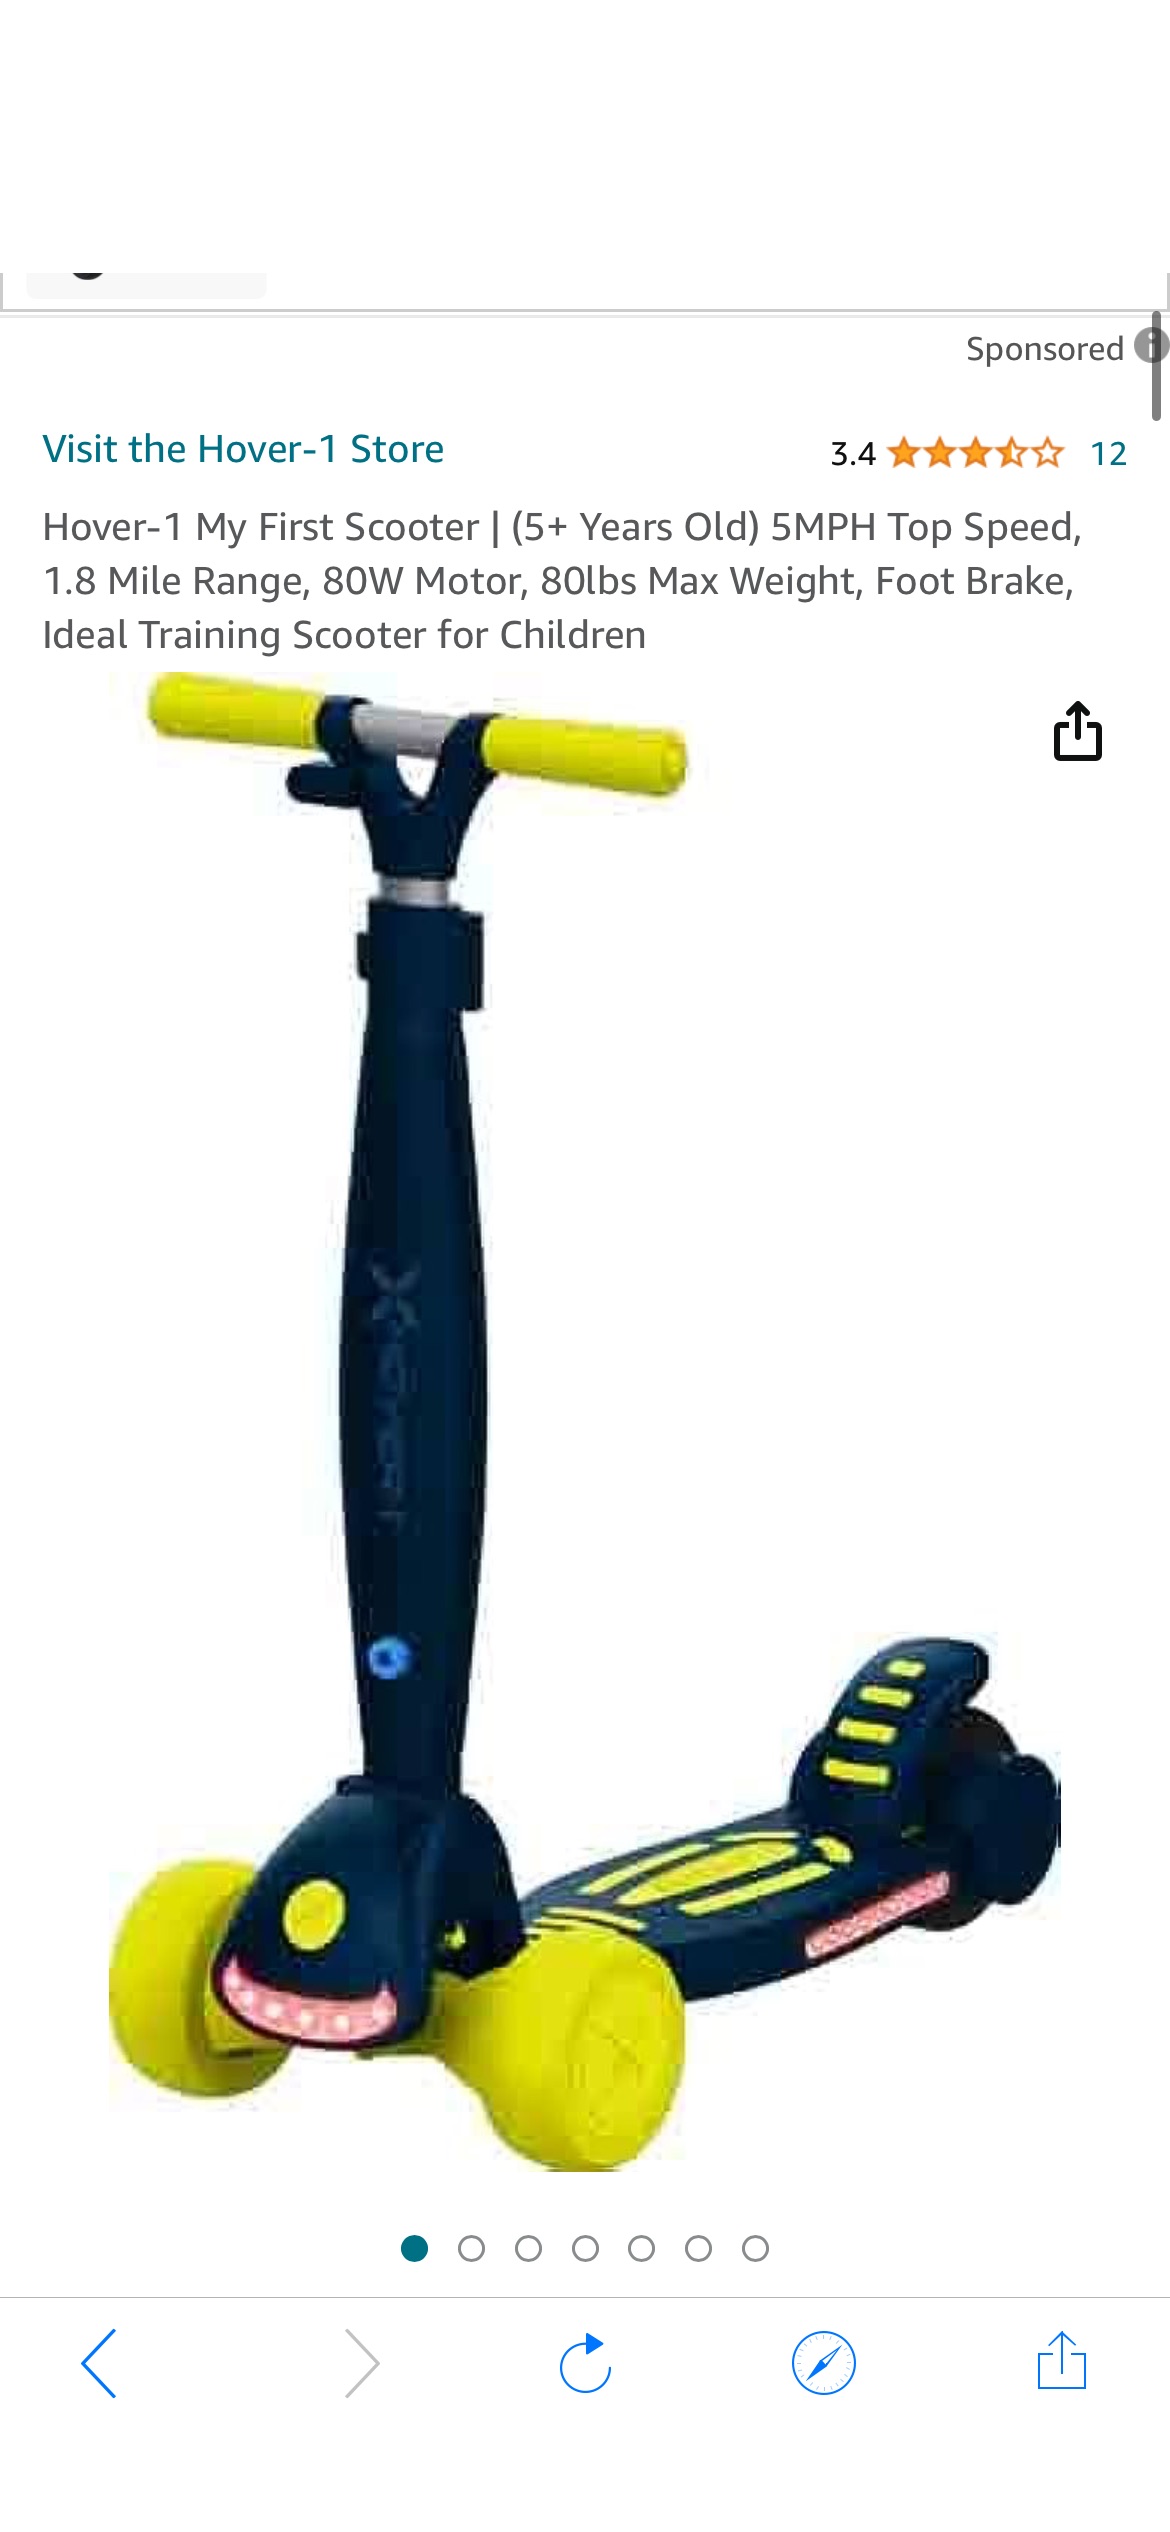 Amazon.com : Hover-1 My First Scooter | (5+ Years Old) 5MPH Top Speed, 1.8 Mile Range, 80W Motor, 80lbs Max Weight, Foot Brake, Ideal Training Scooter for Children, Cert. & Tested, Mint : Sports & Out